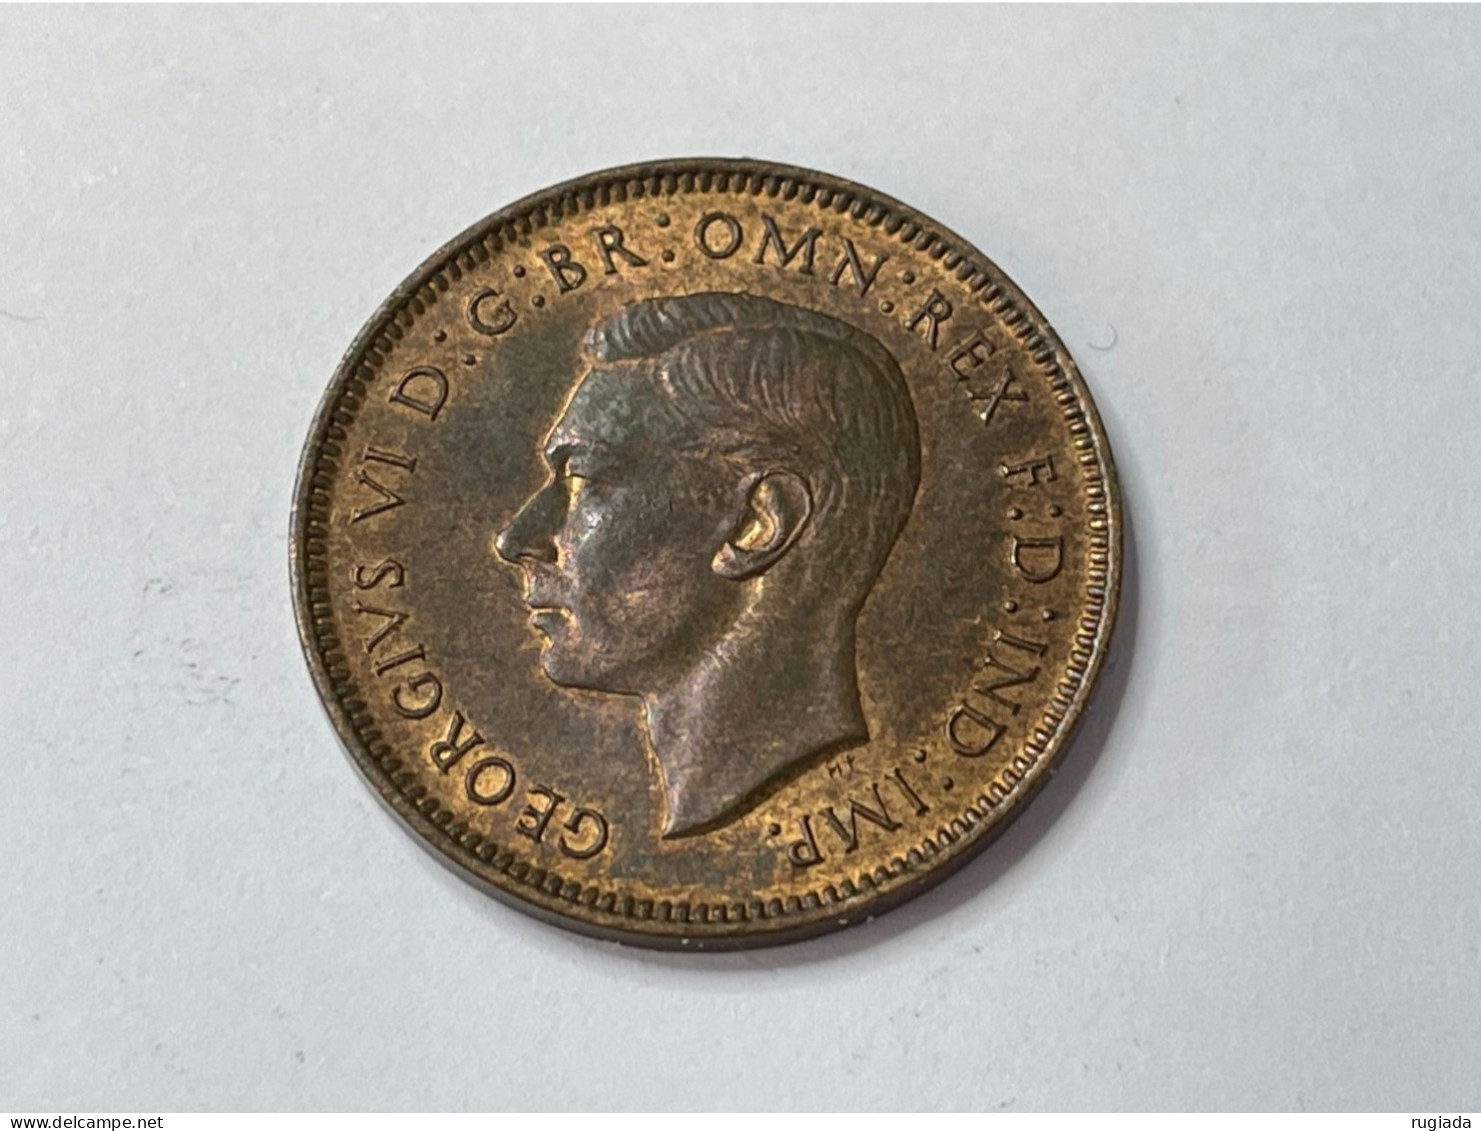 1946 Great Britain George VI Farthing Coin, AU About Unc, Some Lustre Remaining - B. 1 Farthing